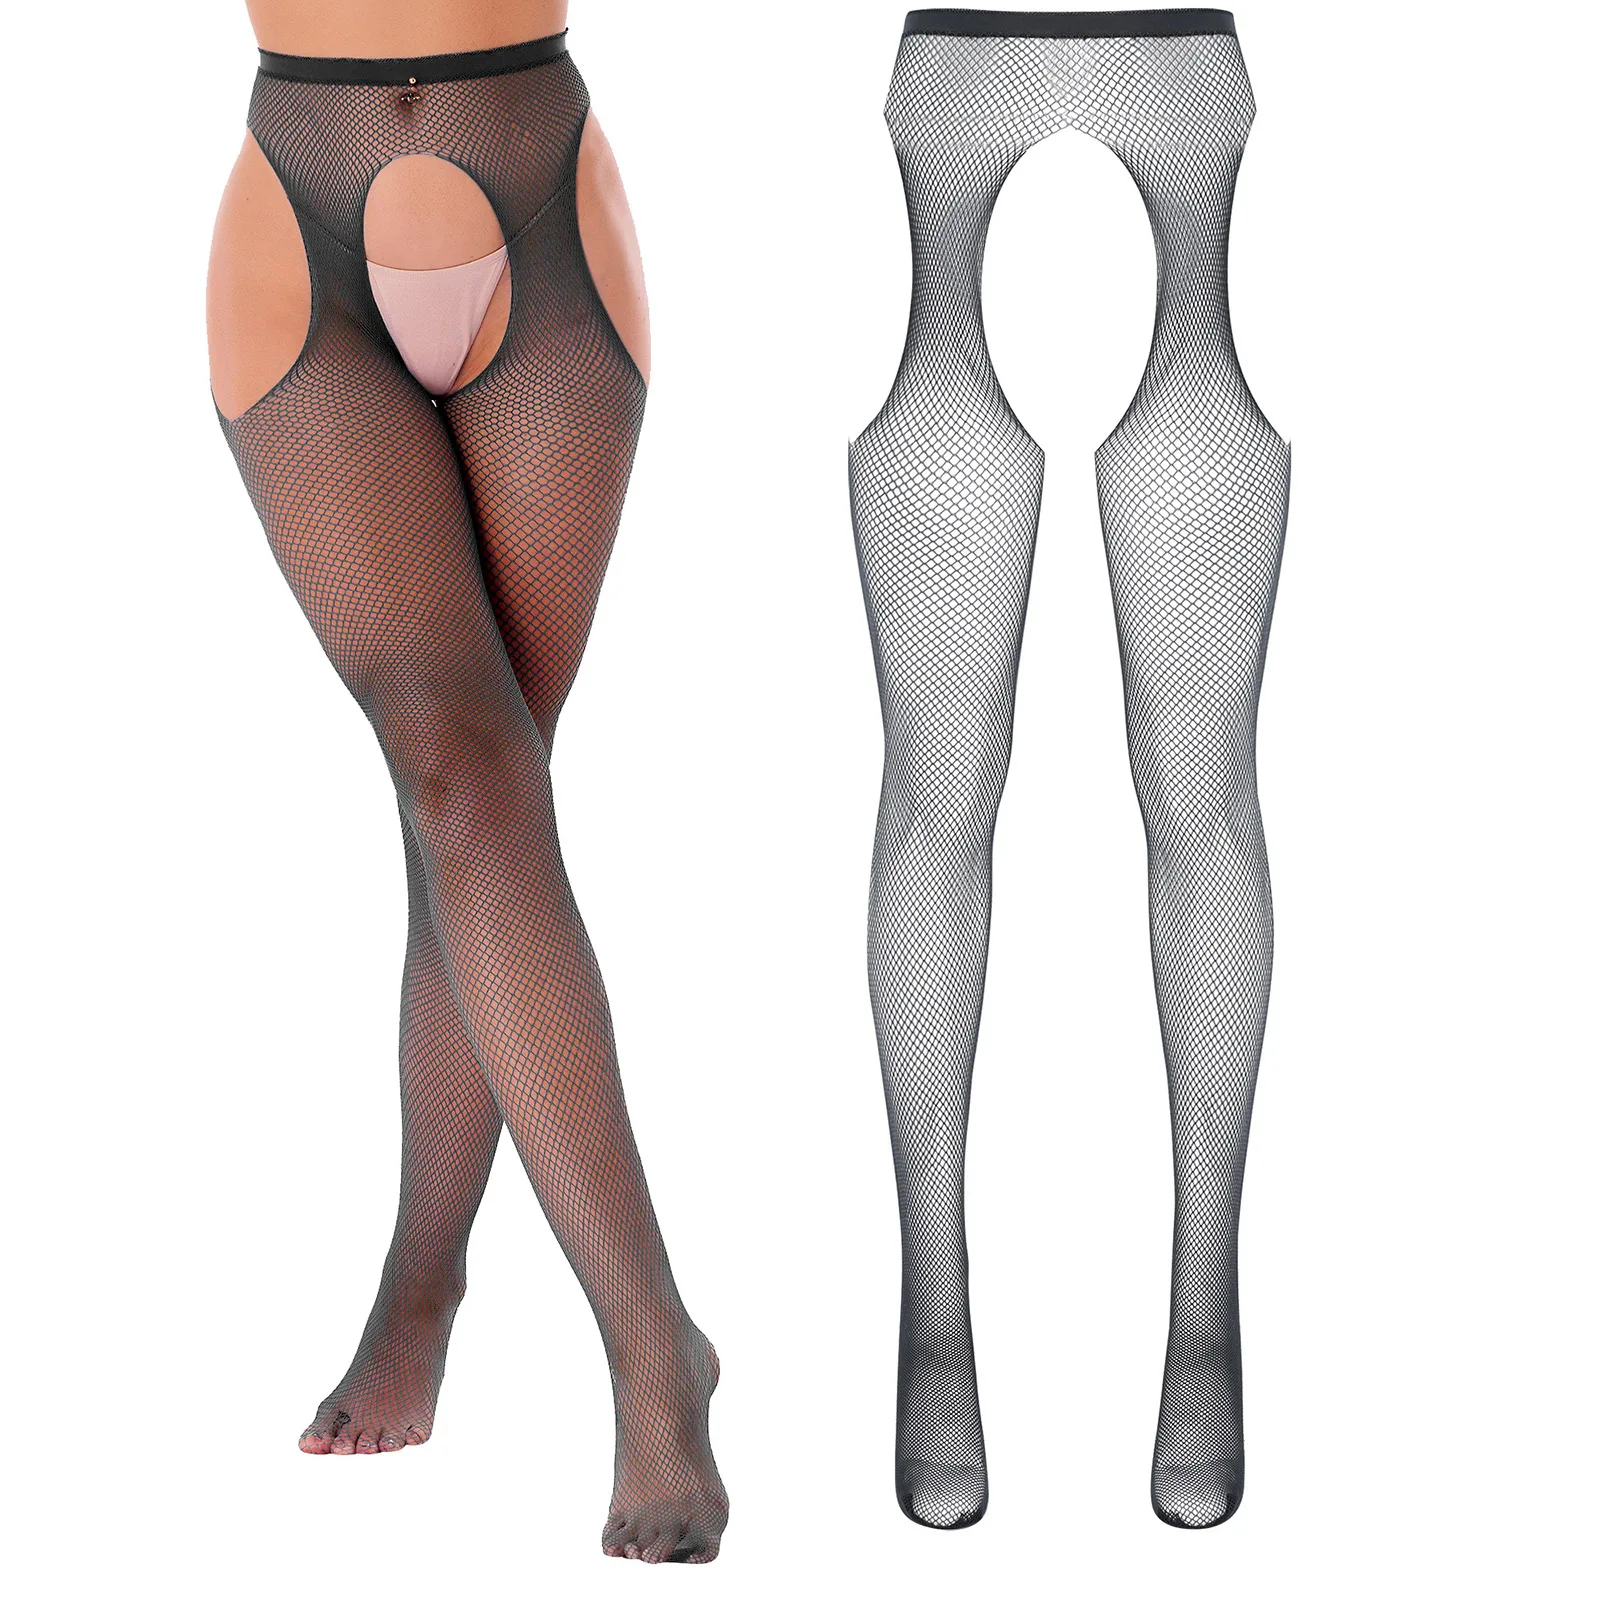 Womens Sexy Open Crotch Pantyhose Stockings Hollow Out Mid Waist Elastic Cutout Crotchless Leggings Underwear Erotic Lingerie sexy stockings temptation sexy perspective open crotch hollow out pantyhose stockings erotic lace tearable high waist hosiery